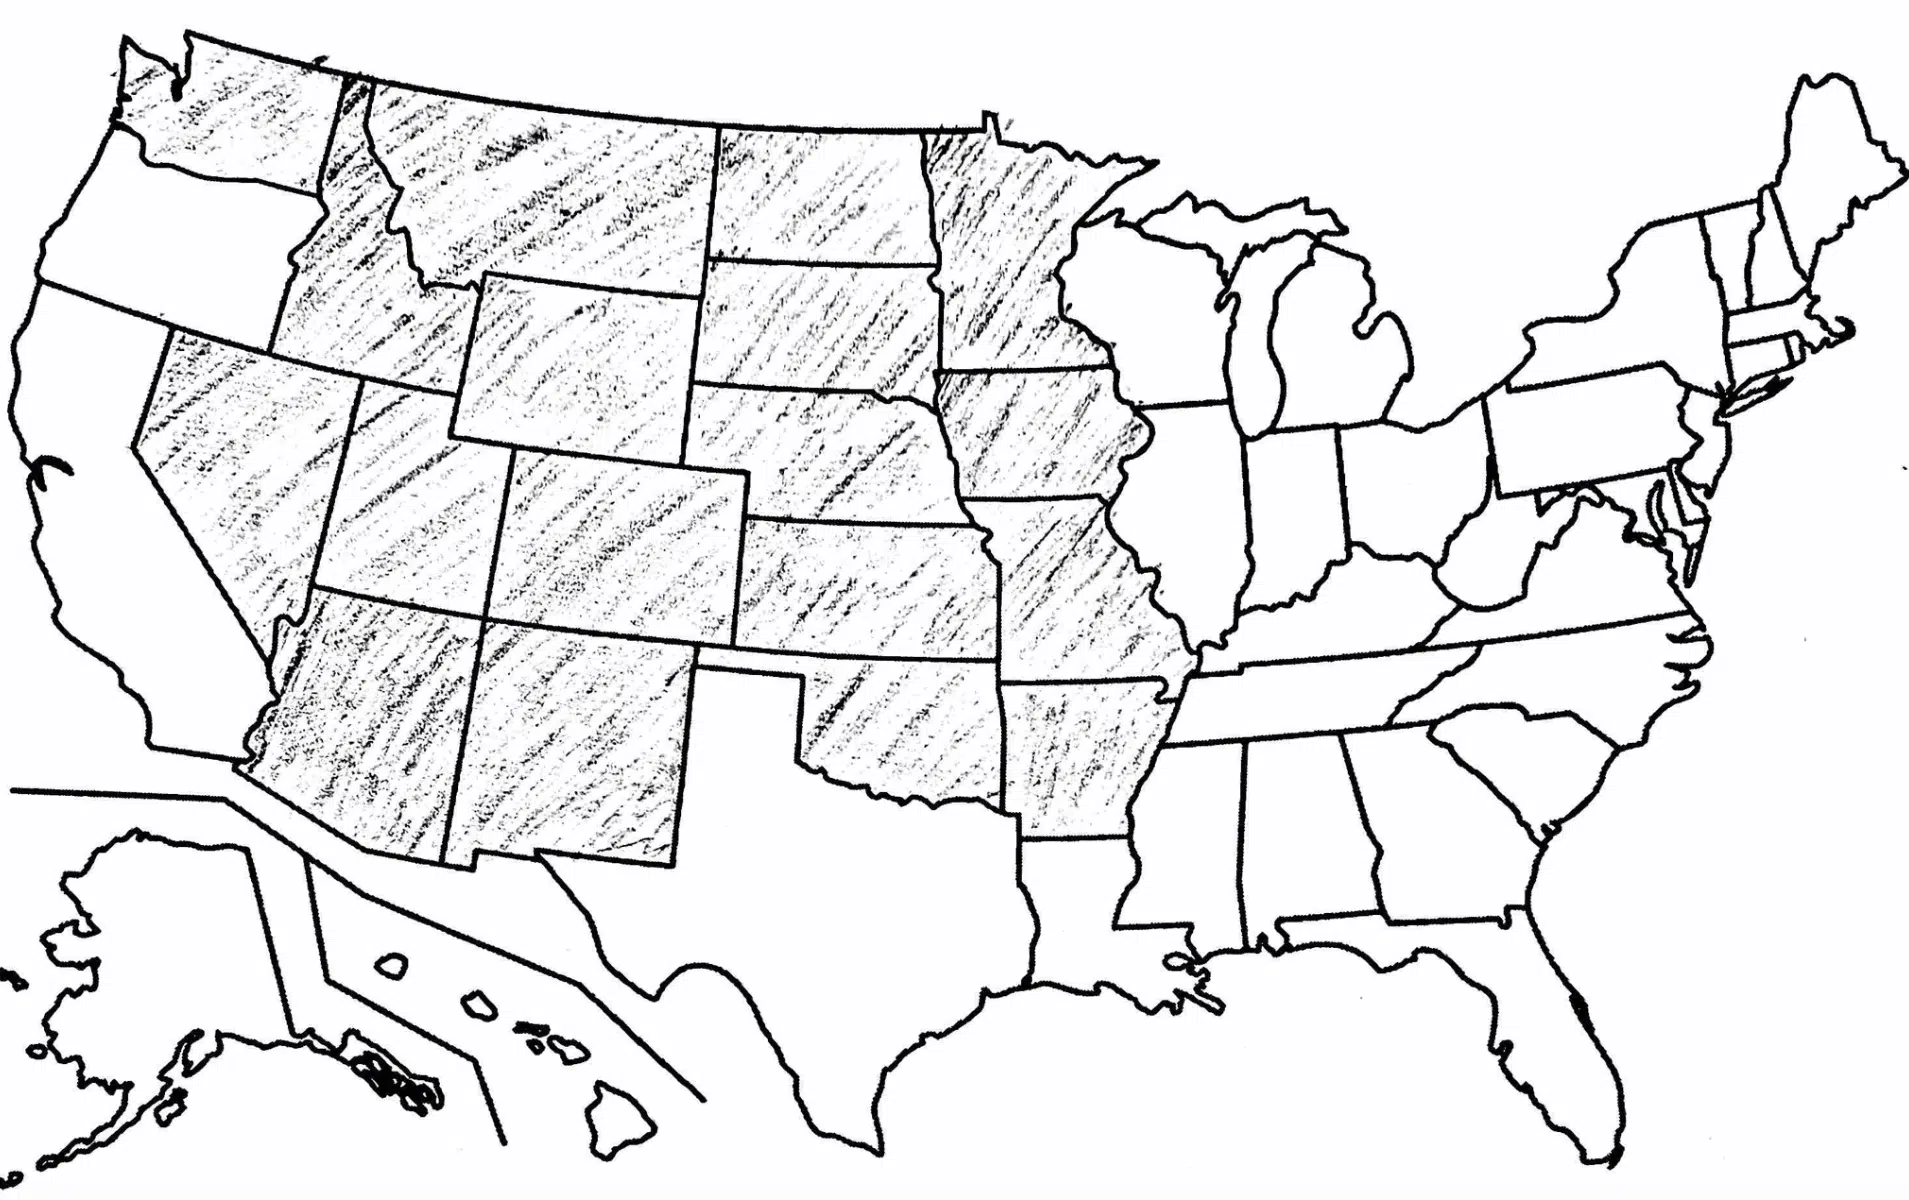 united states map with grayed-out states showing the number of people killed by abortion in the US